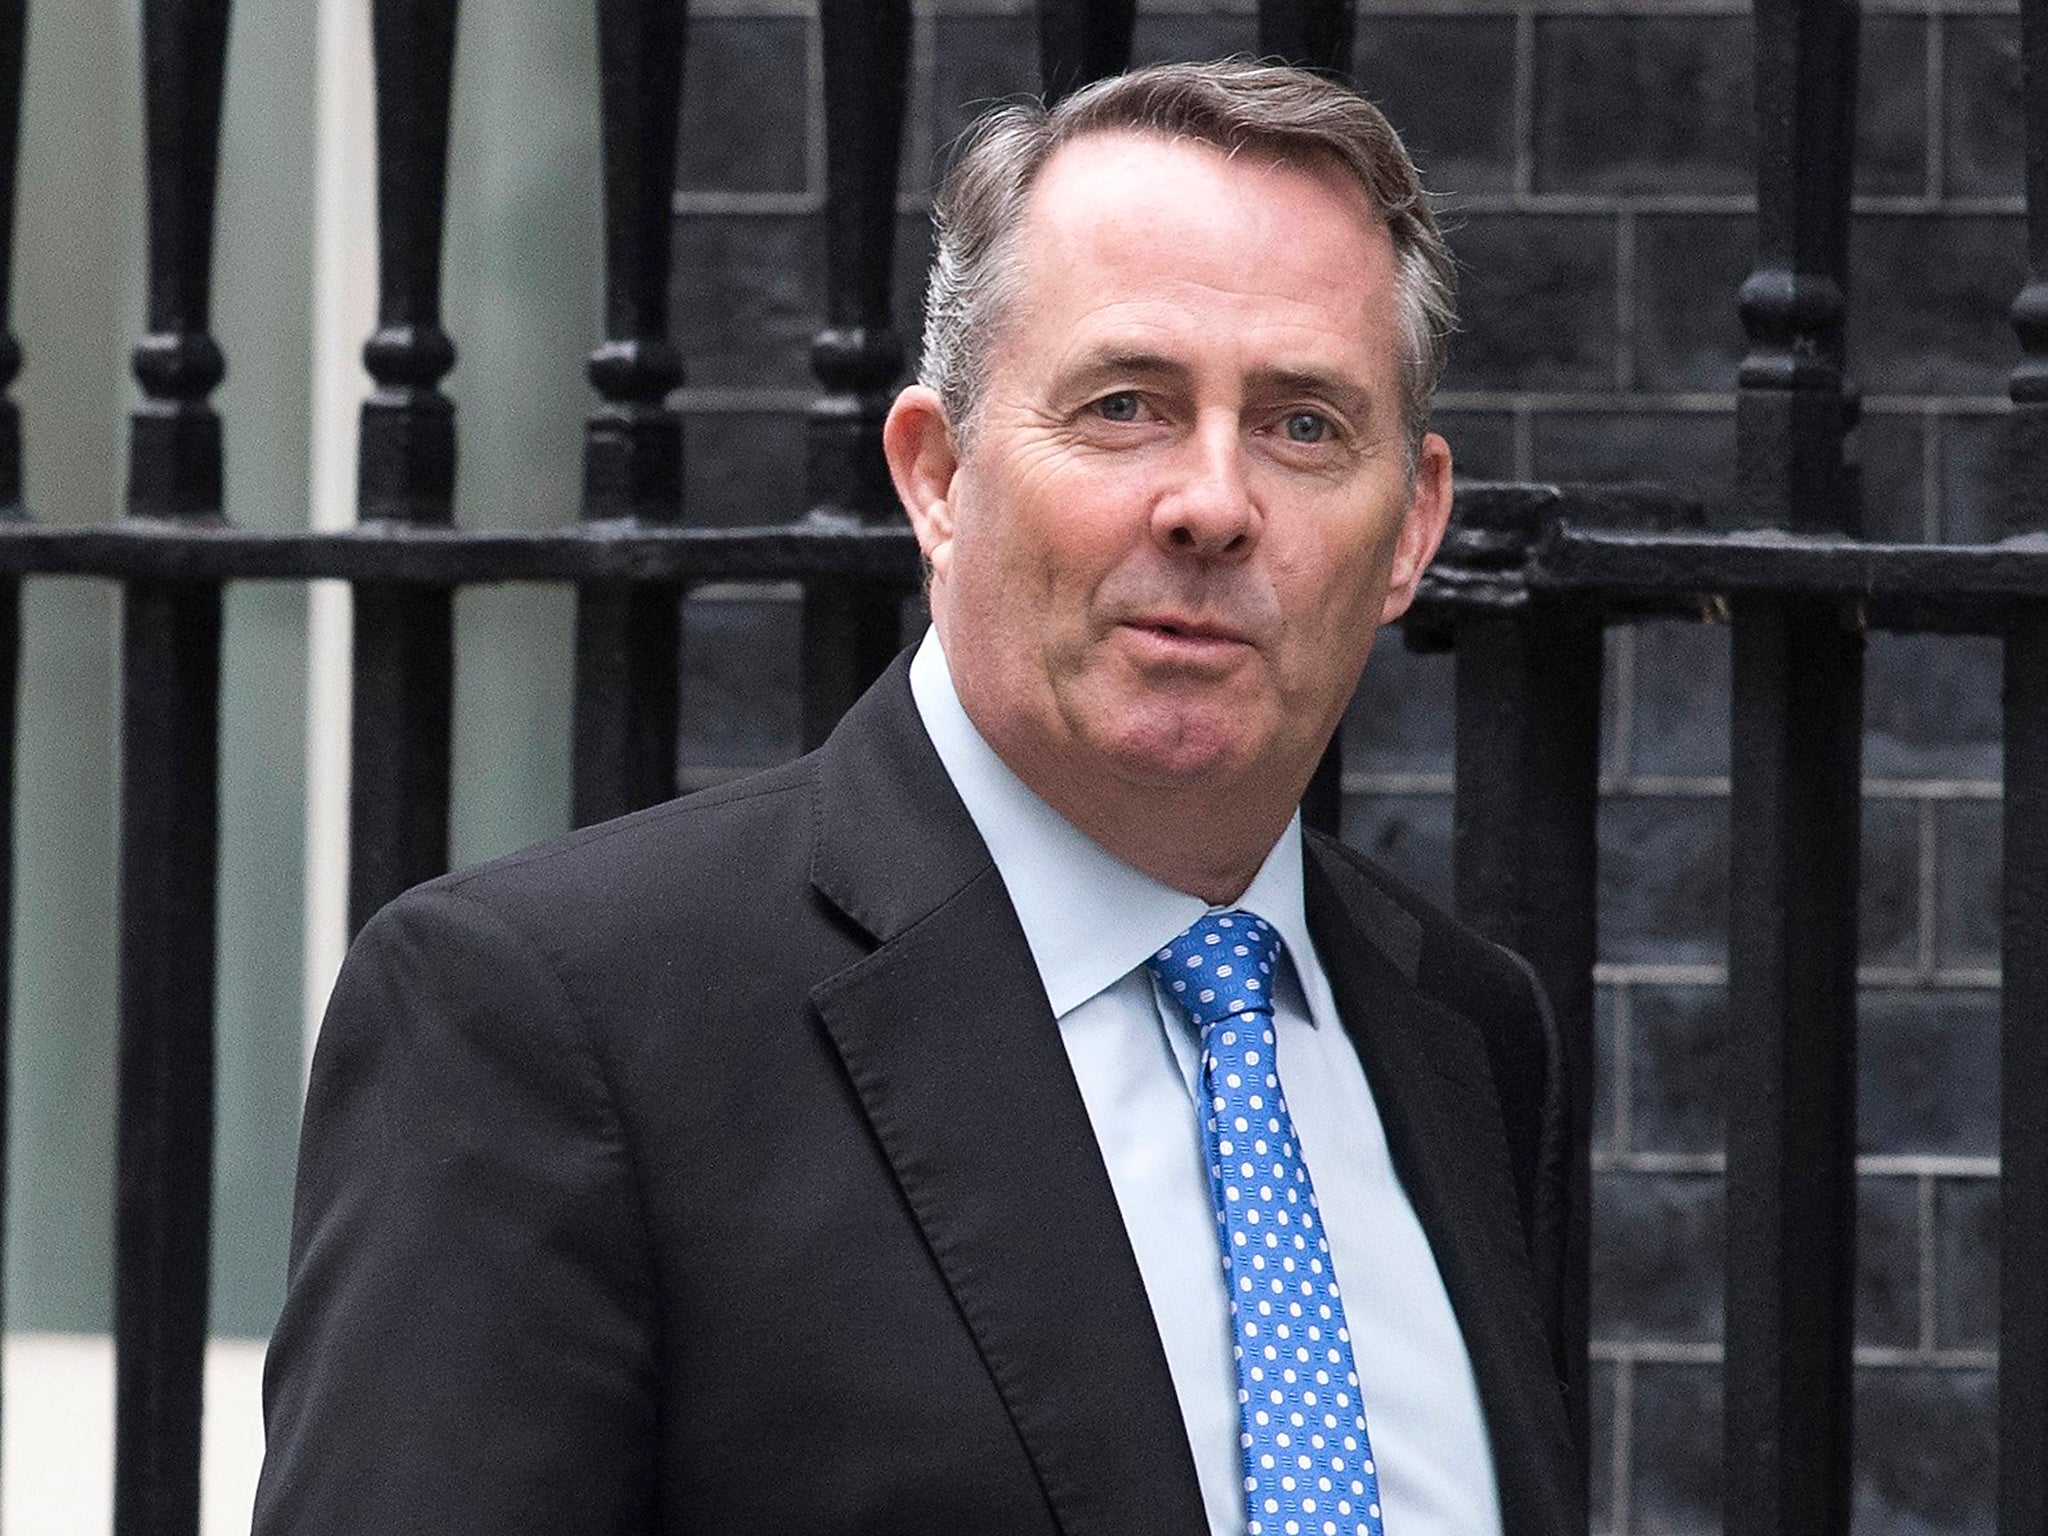 Liam Fox has previously claimed some parts of the media 'would rather see Britain fail than see Brexit succeed'